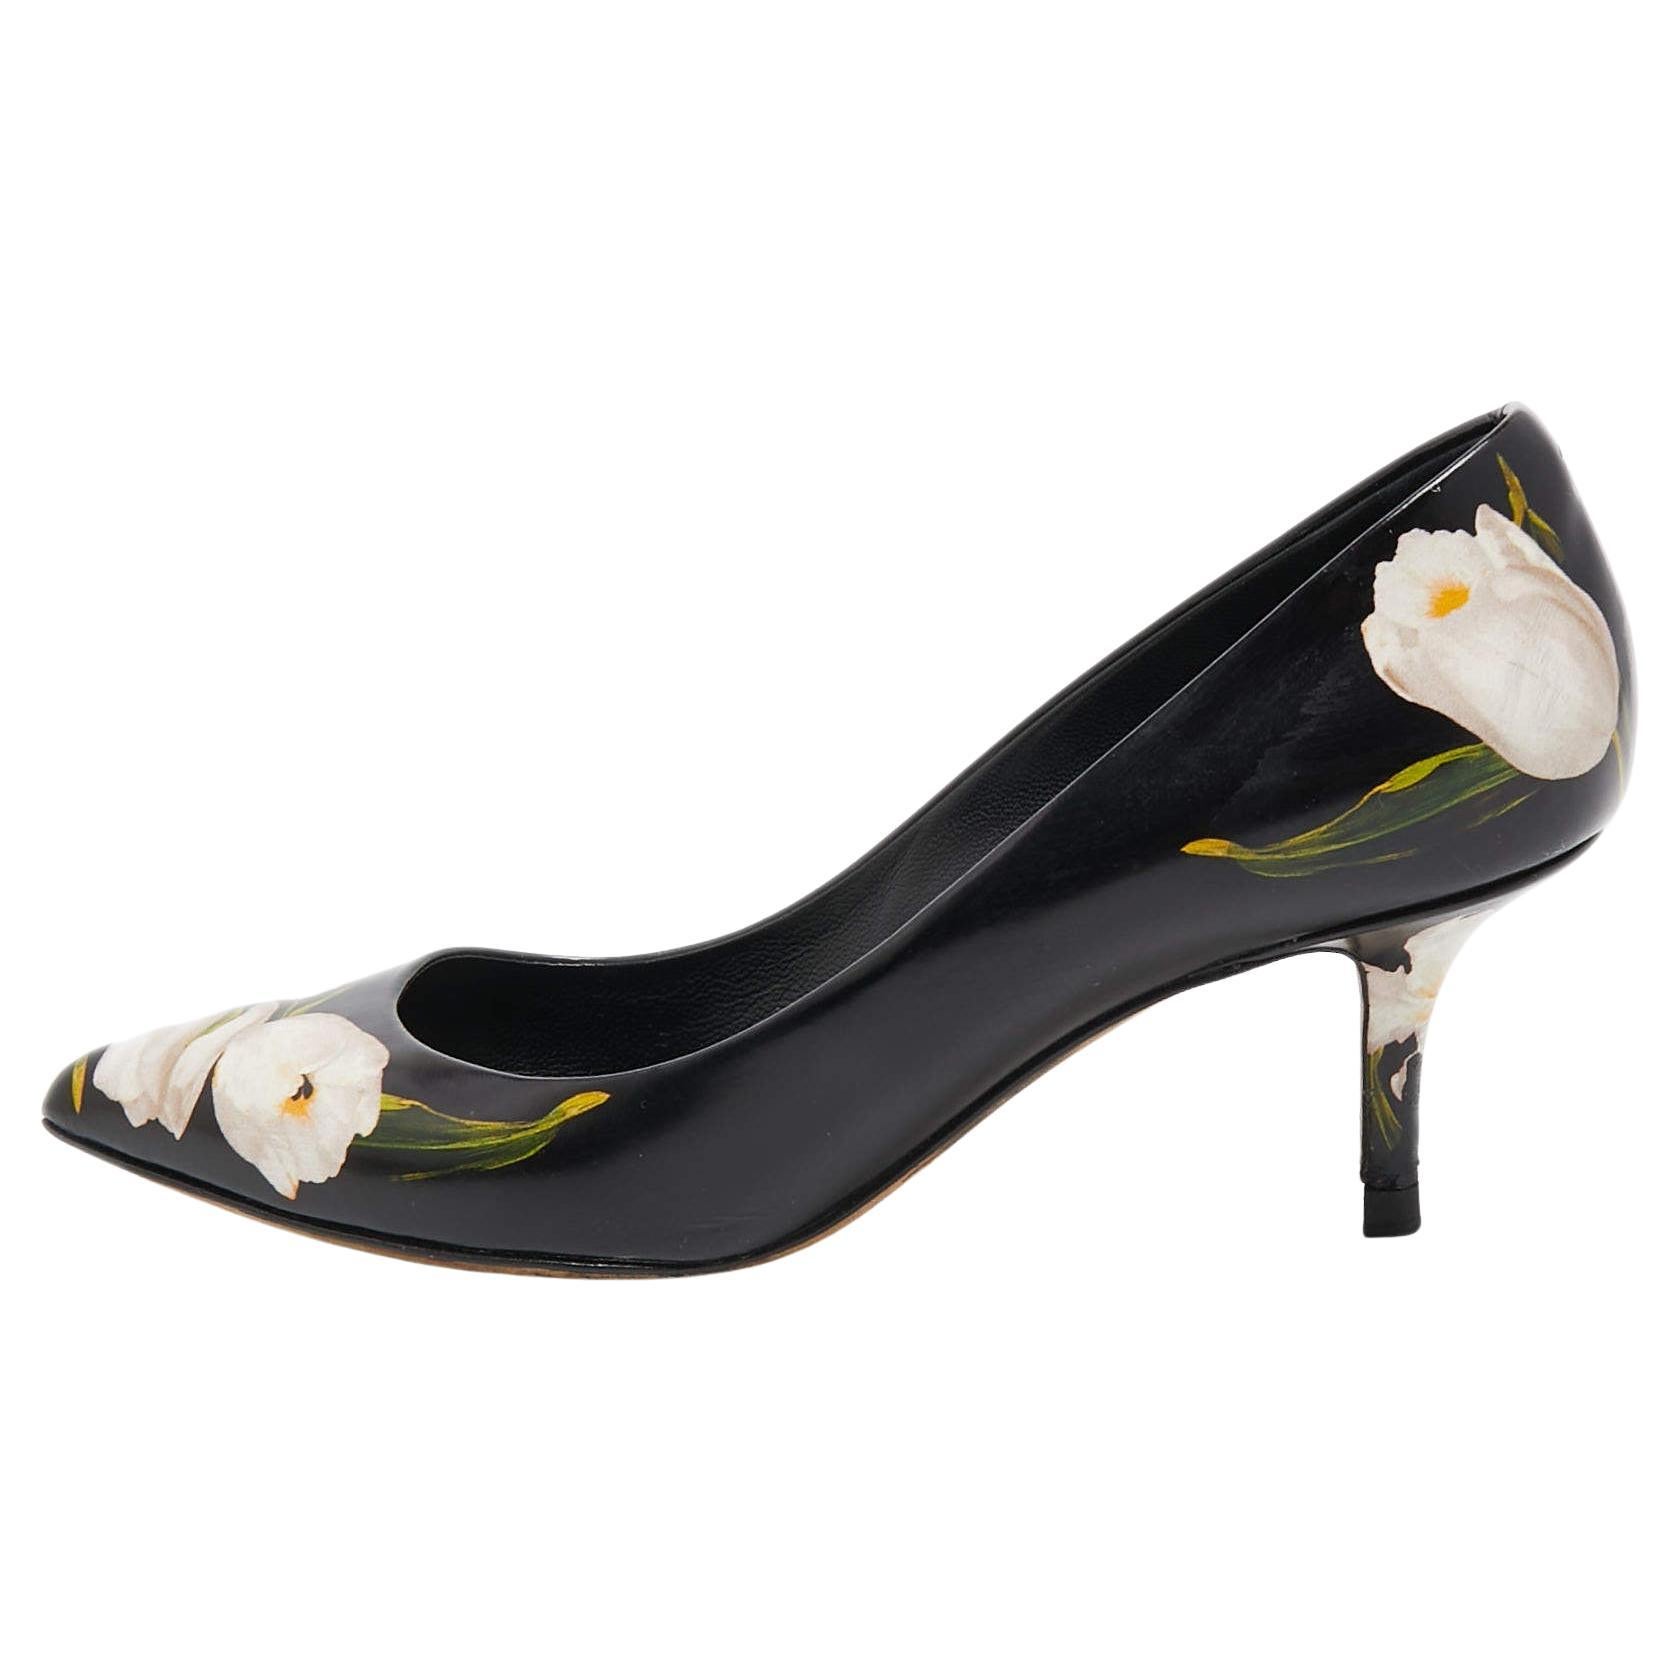 Dolce & Gabbana Black Floral Print Leather Pointed Toe Pumps Size 36